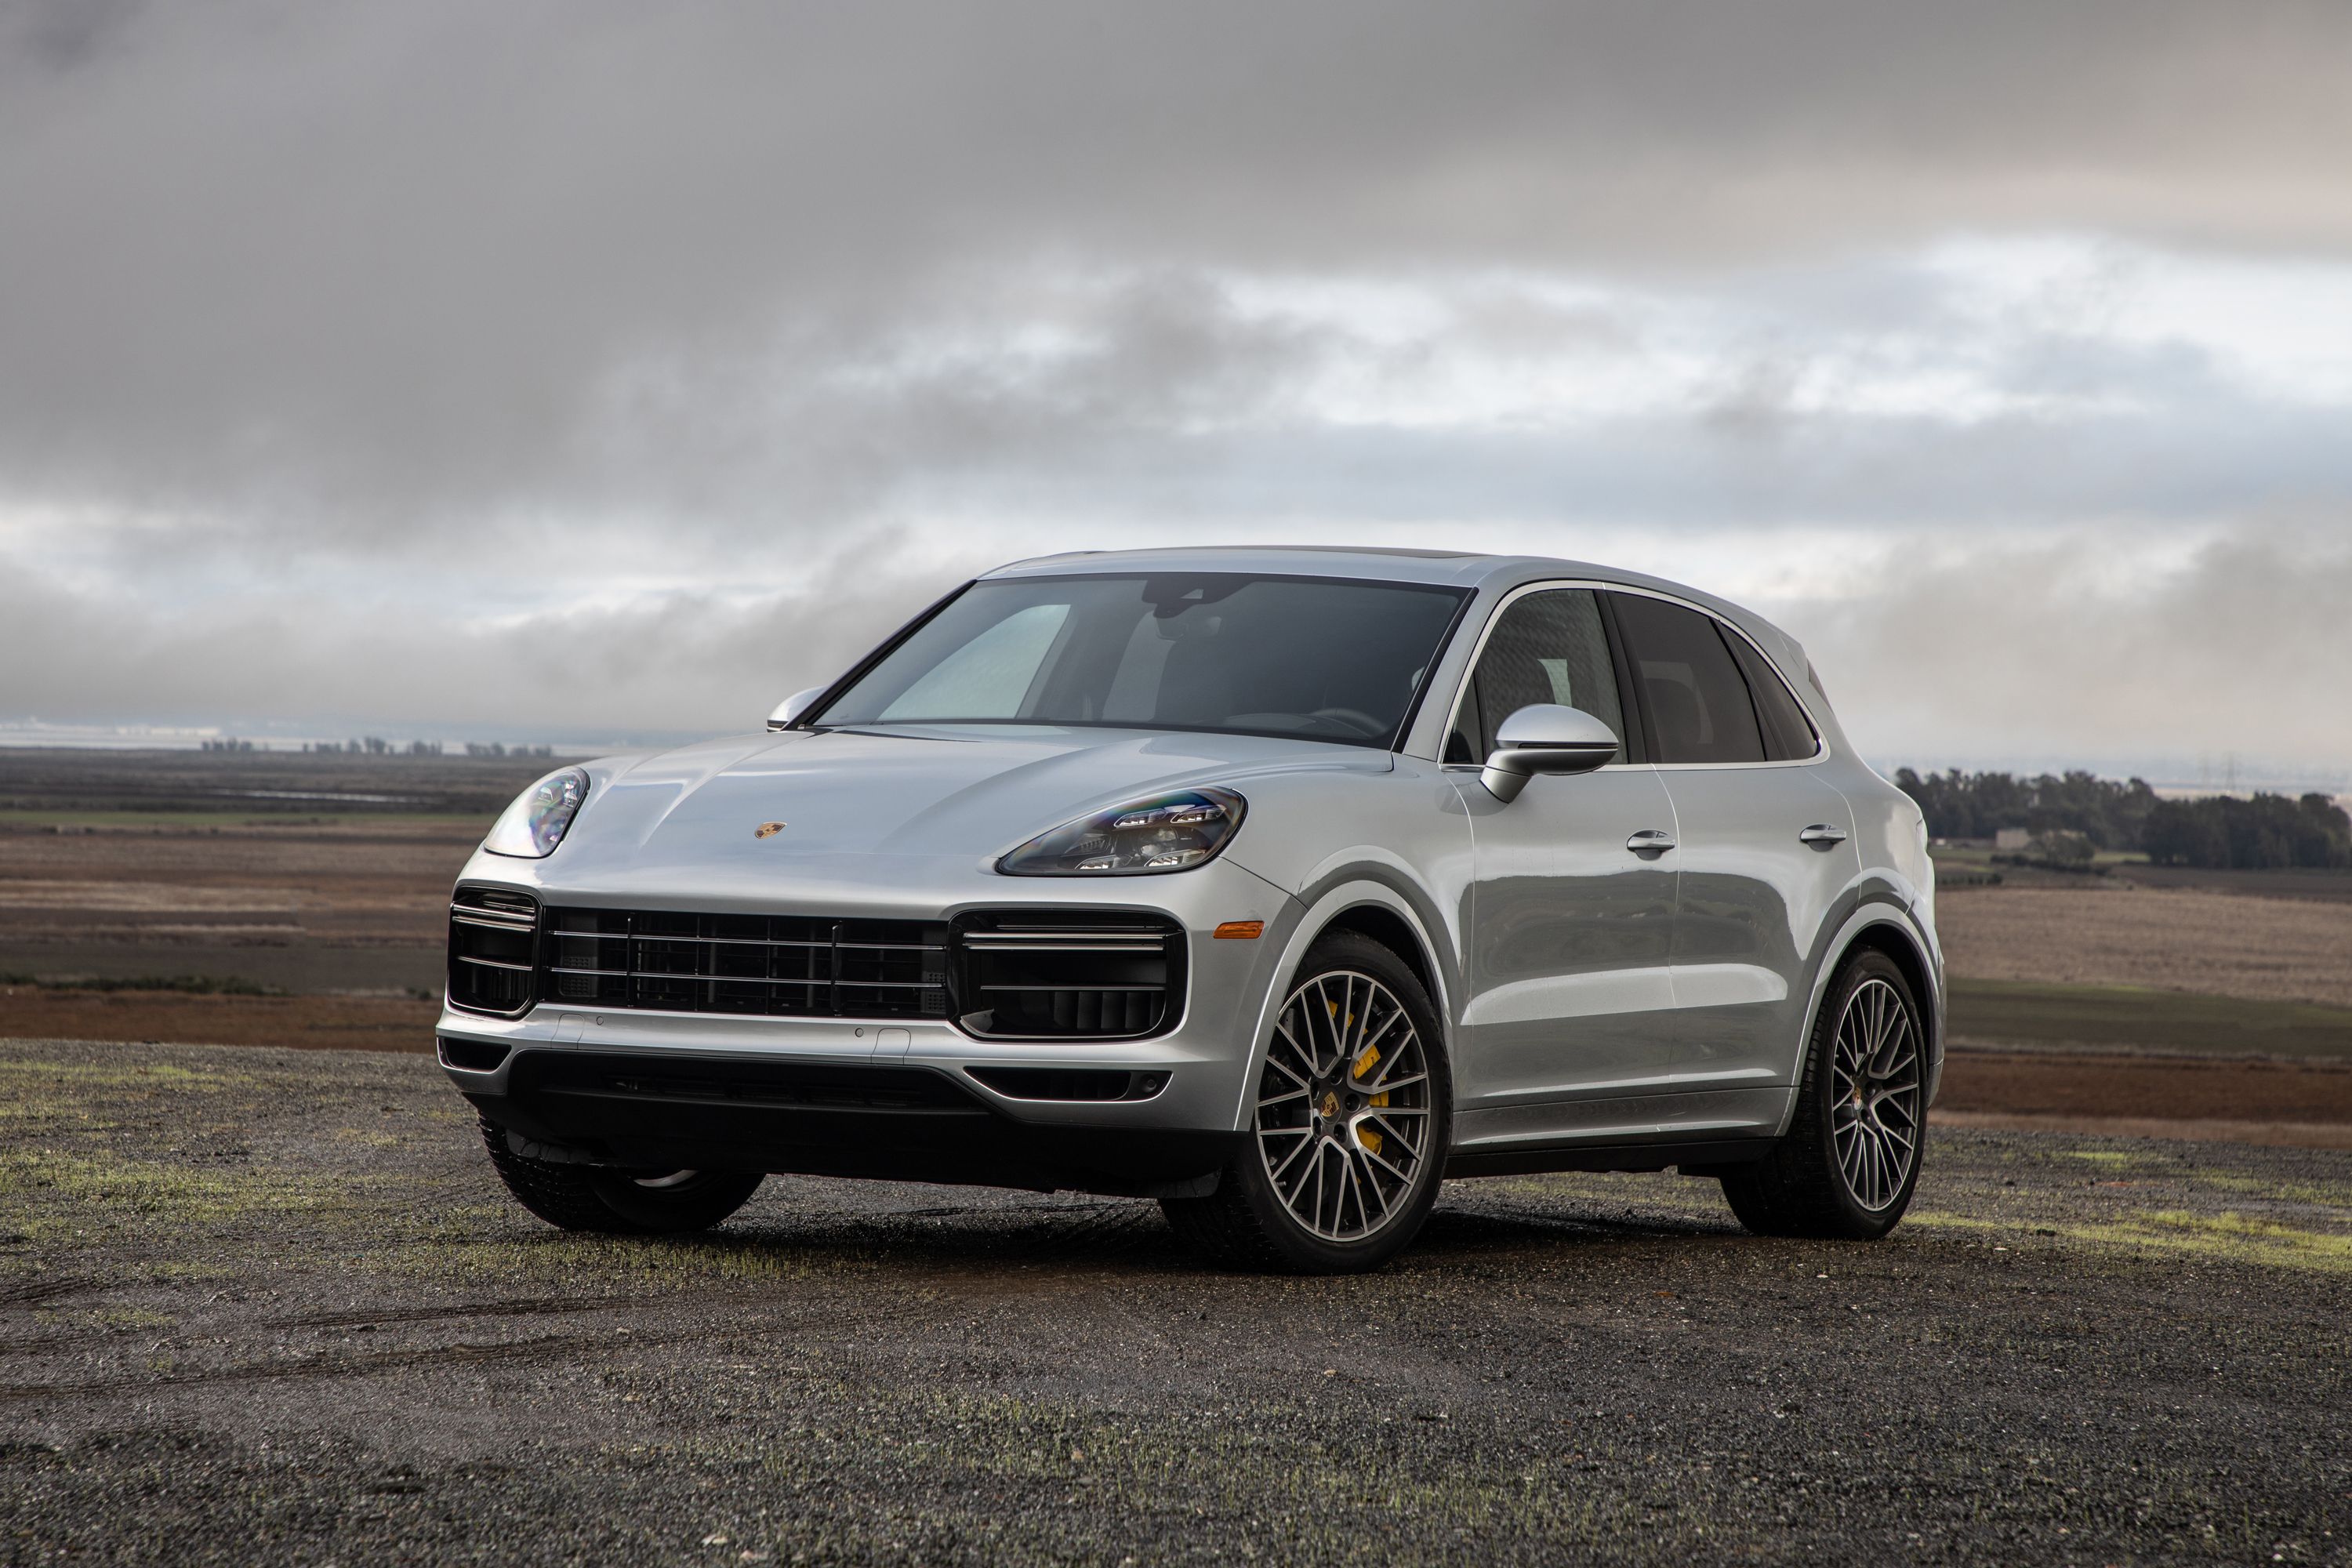 2021 Porsche Cayenne Turbo/Turbo S Review, Pricing, and Specs